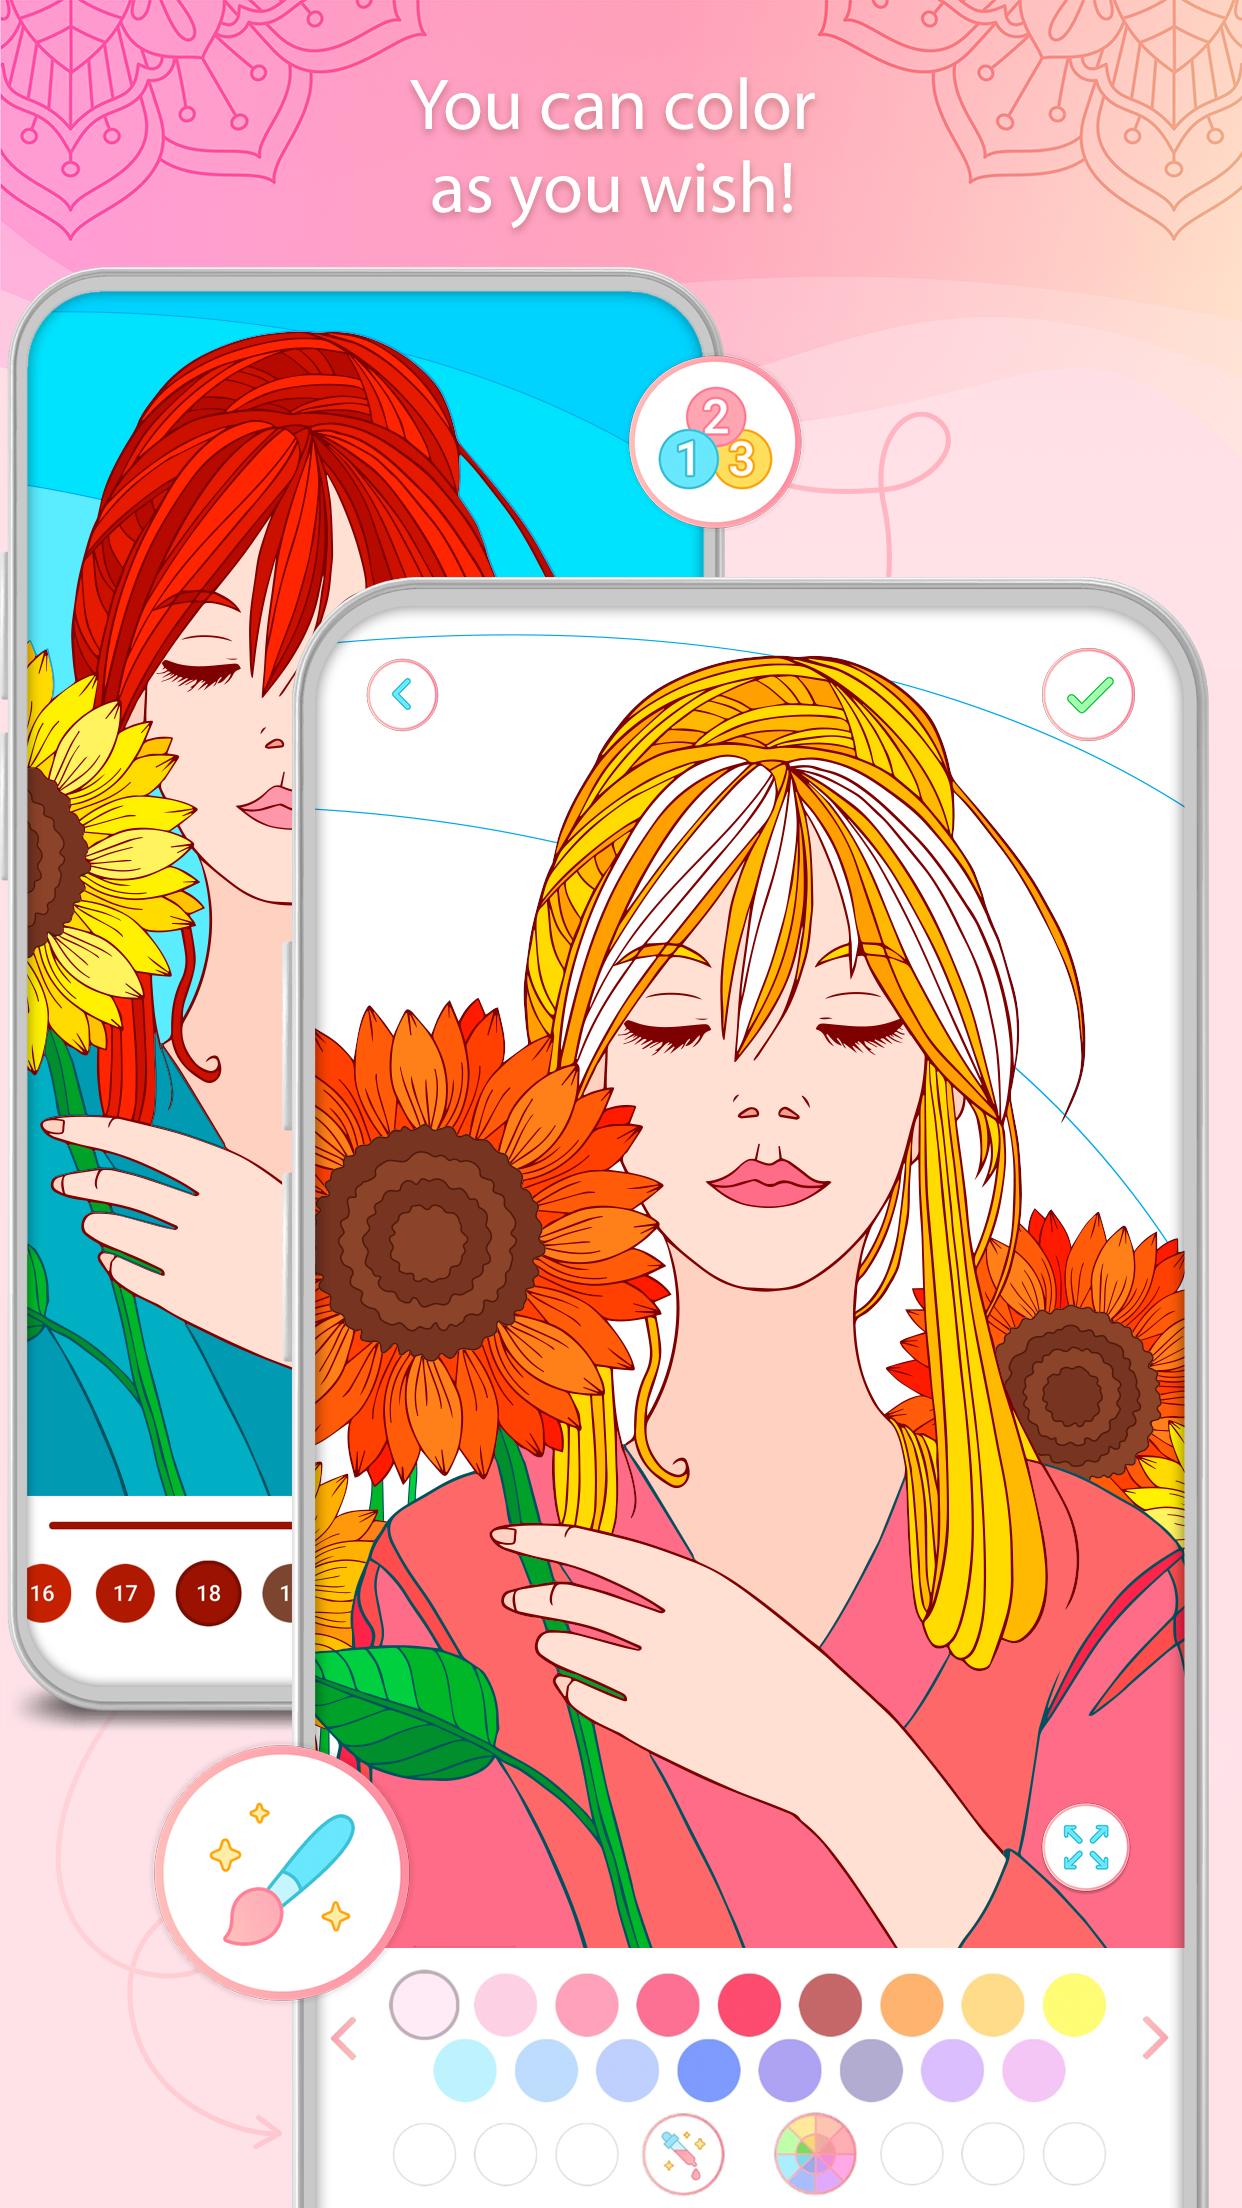 Amazing color by number app for your photo